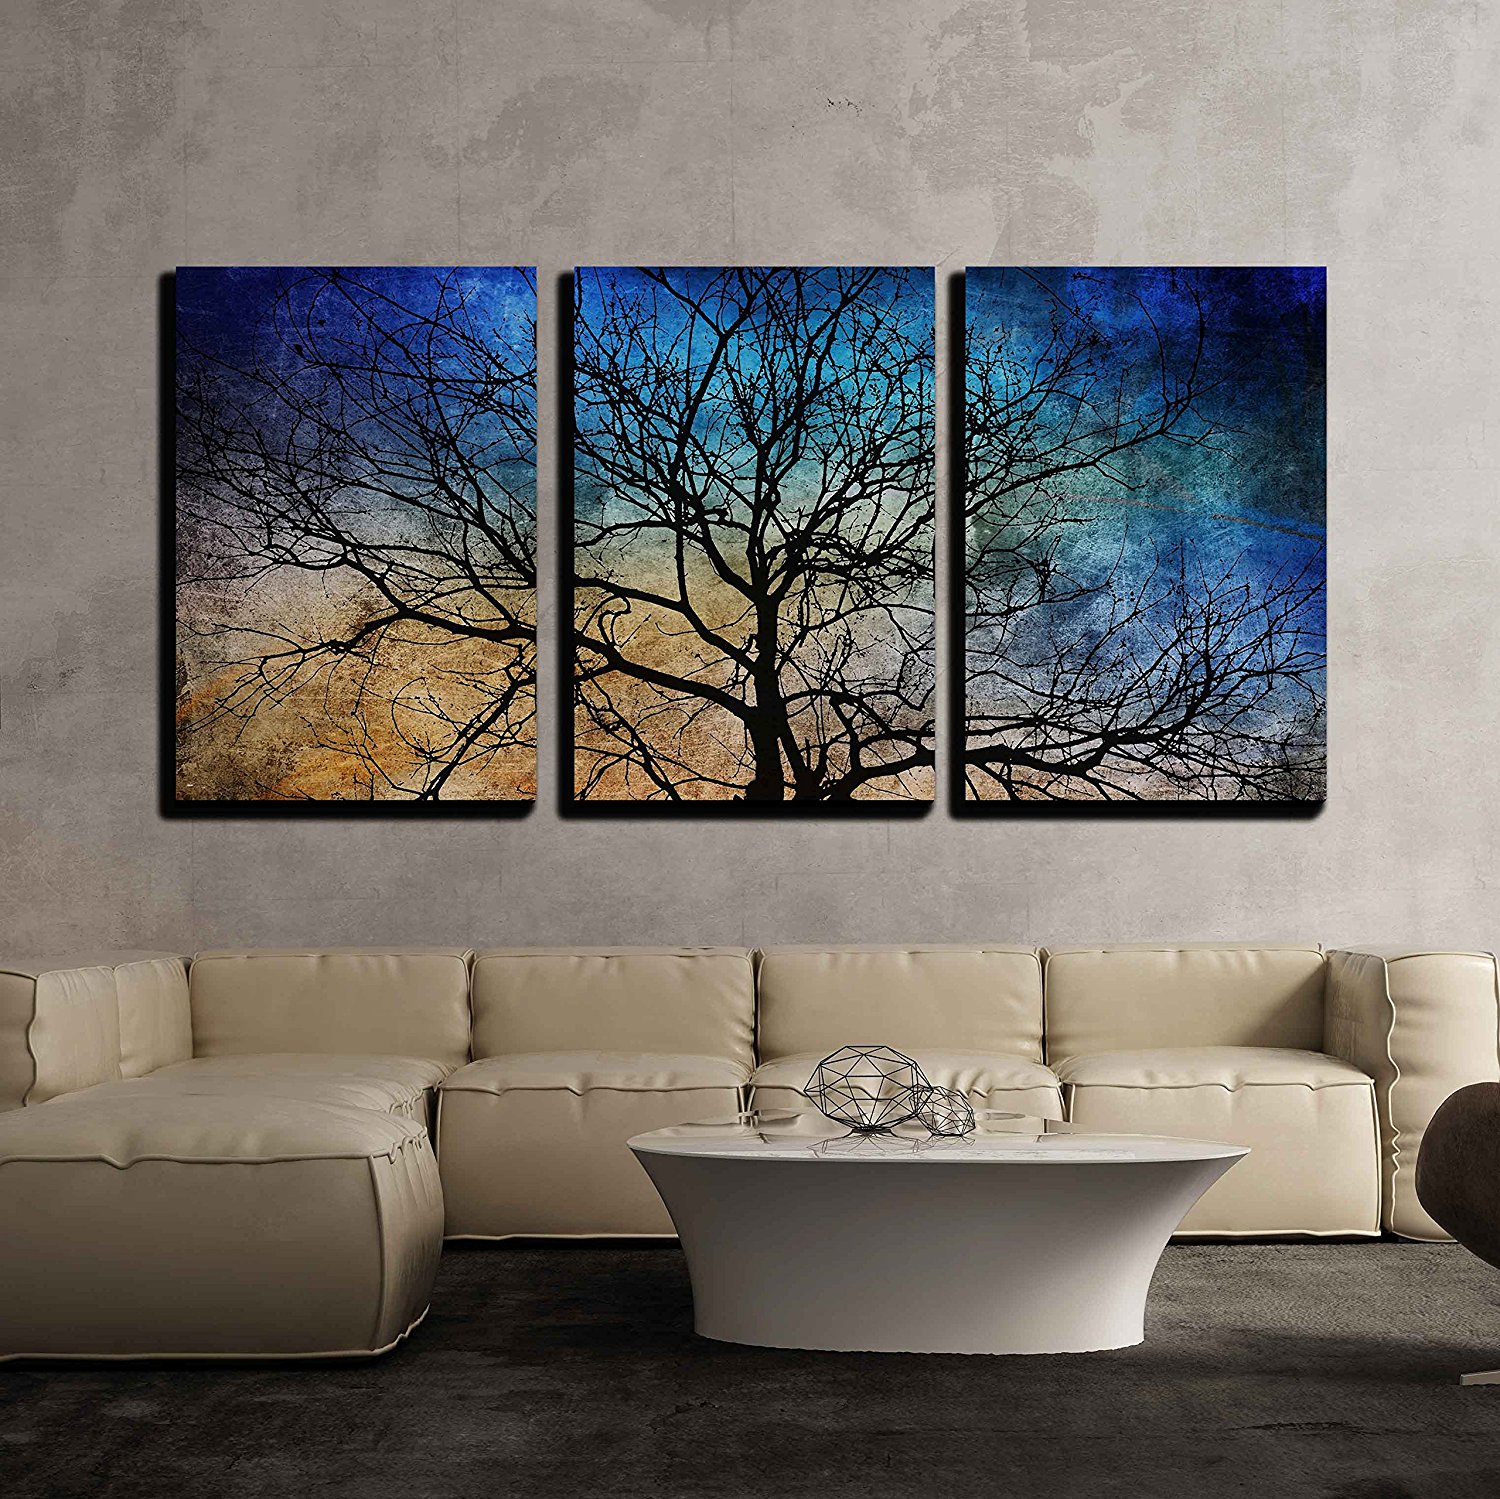 Black Tree Branches on Abstract Colorful Background Canvas Wall Art Drop shipping 